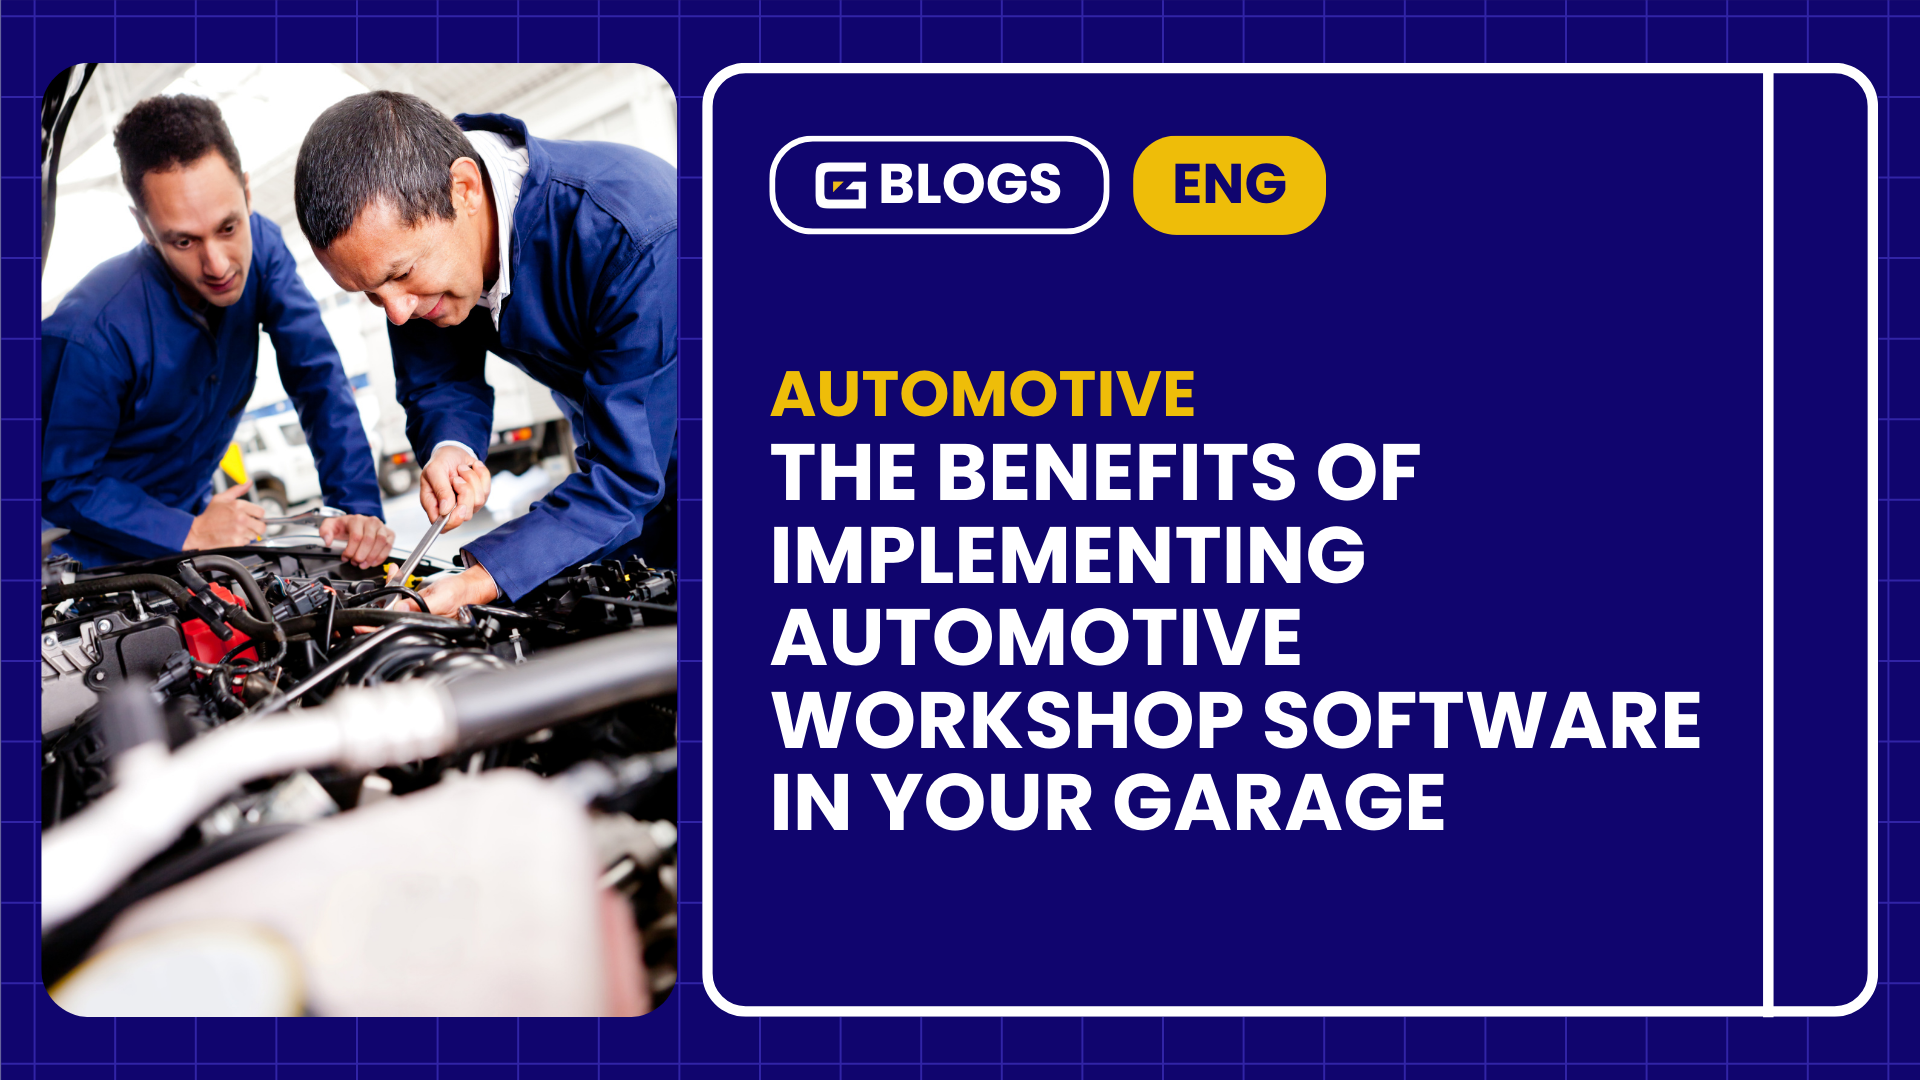 The Benefits of Implementing Automotive Workshop Software in Your Garage